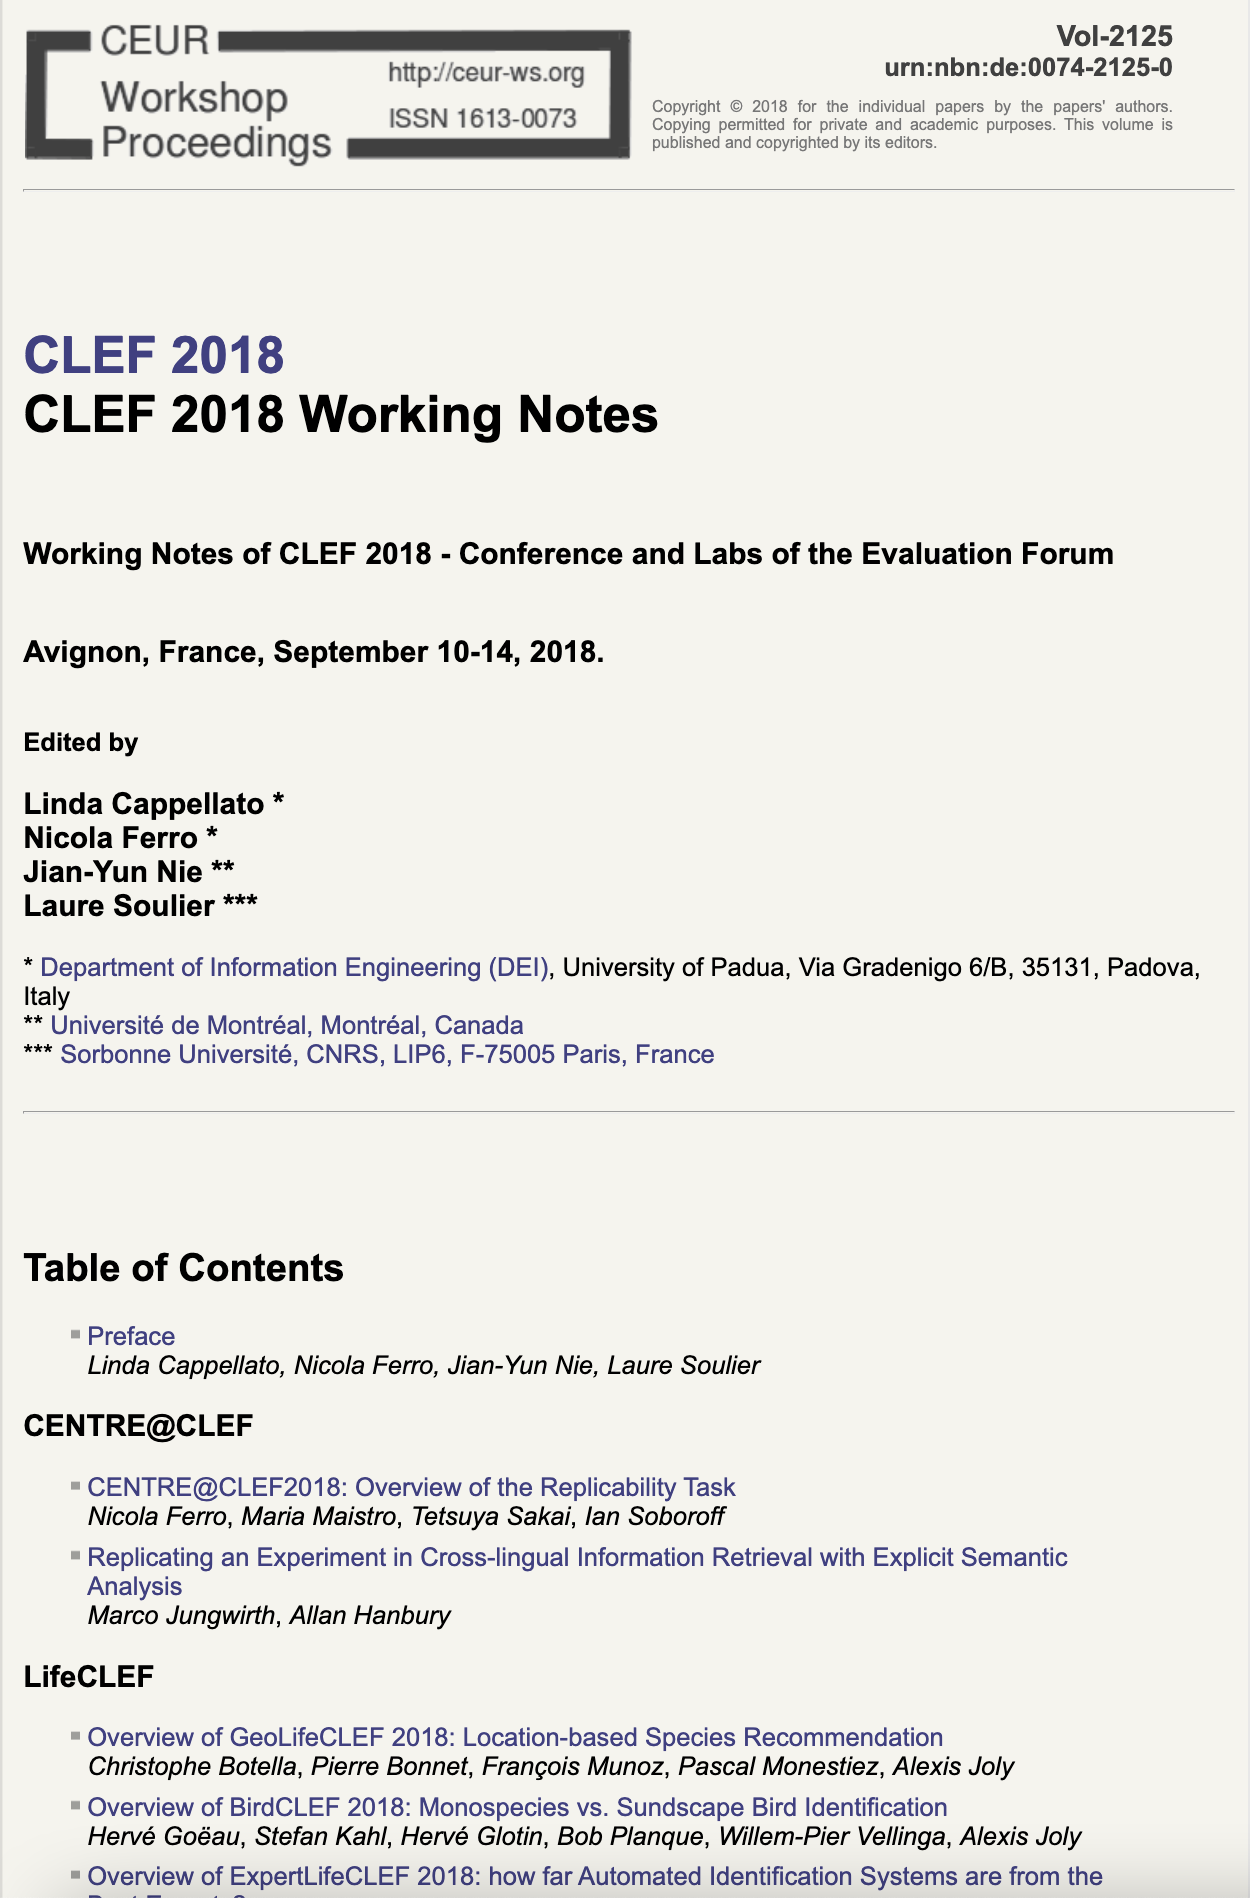 CLEF 2018 CEUR-WS Working Notes page